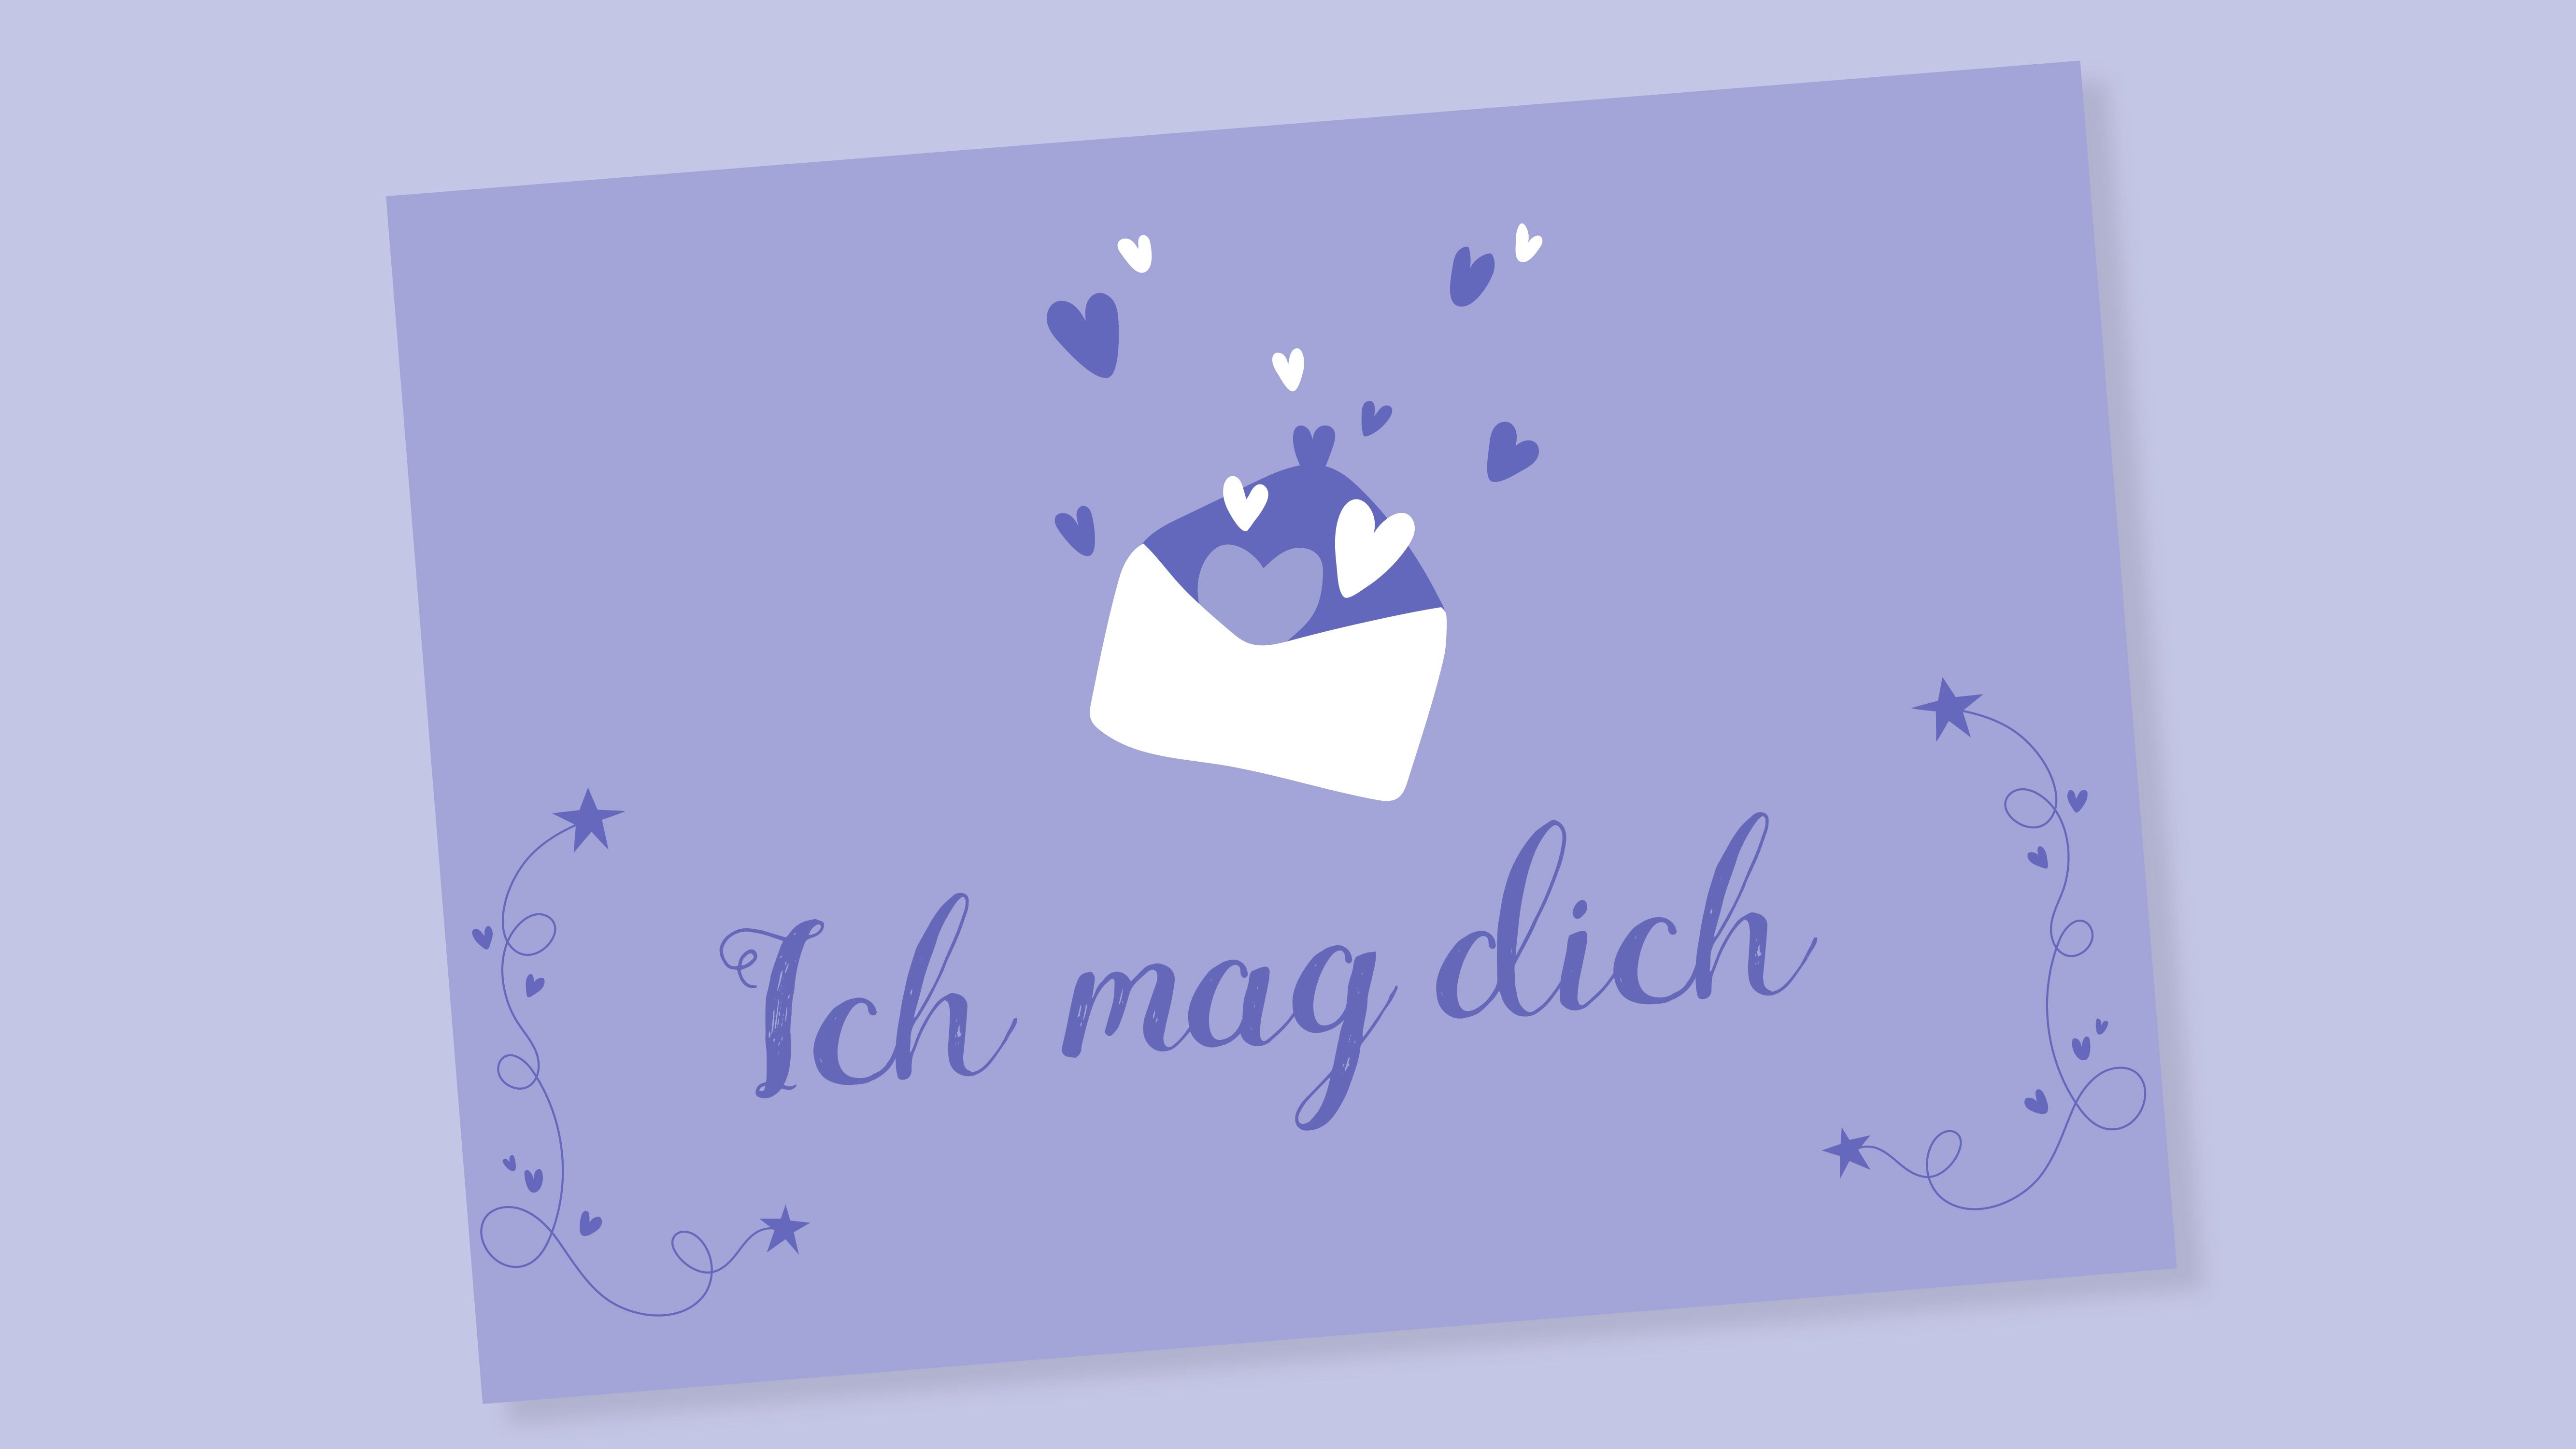 A Valentine’s Day card that says “Ich mag dich.”